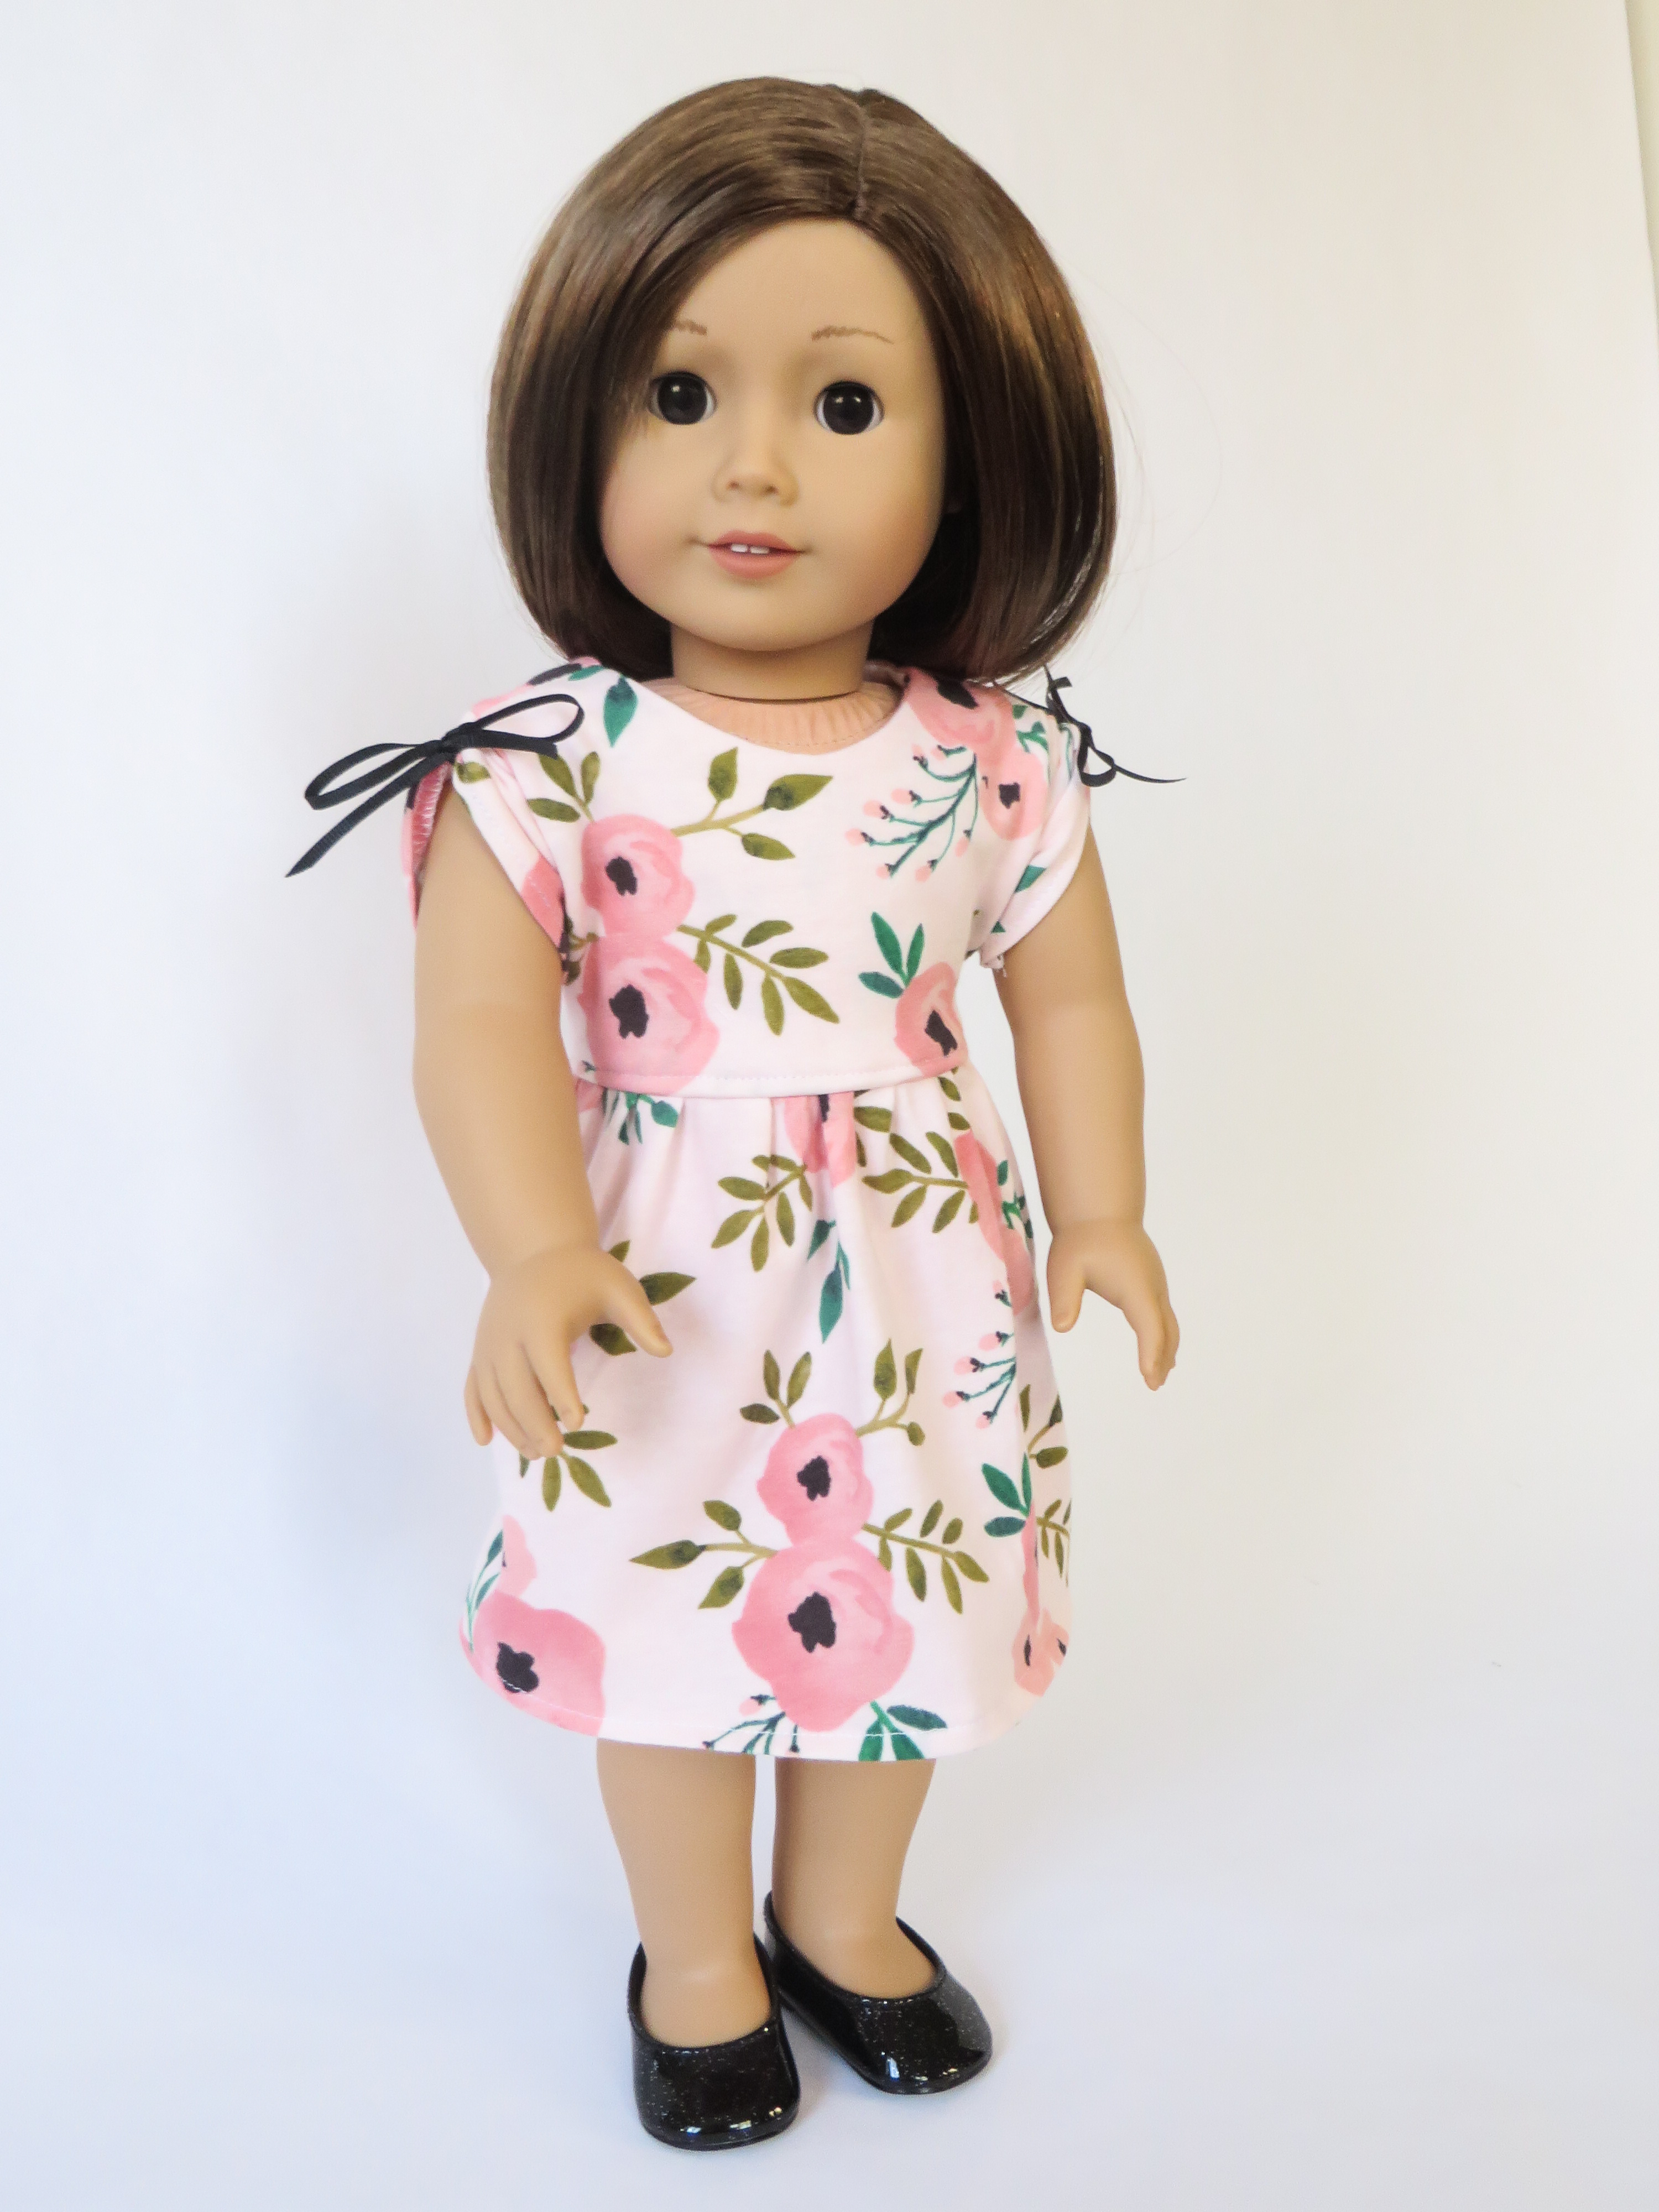 Make a knit dress for your 18 inch doll with this easy pattern hack of the April Moon sewing pattern by Oh Sew Kat! #americangirl #americangirldolls #ohsewkat #dollclothes #patternhack